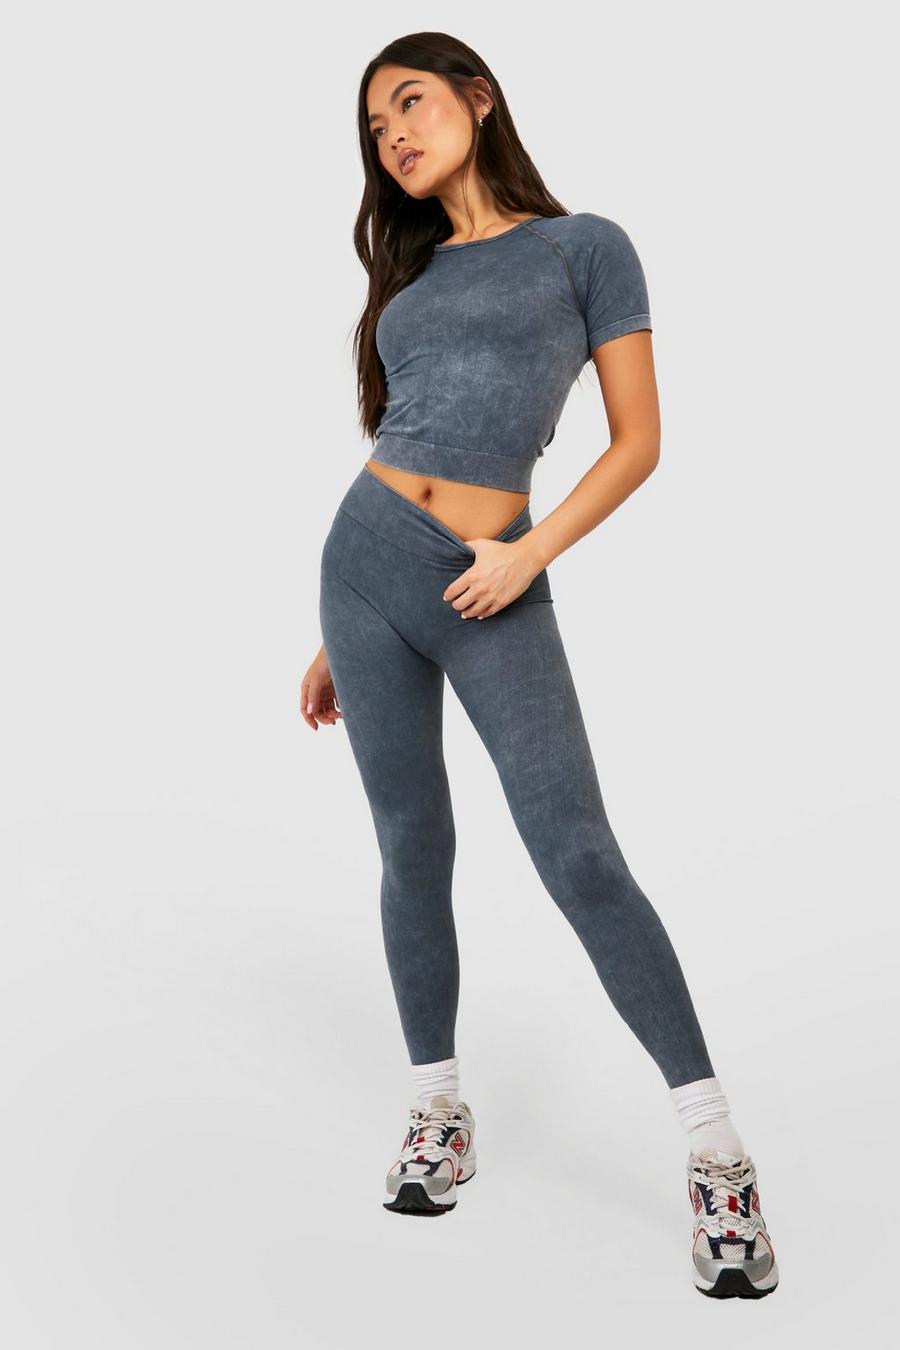 Charcoal grey Seamless Acid Wash Ruched Bum Workout Legging